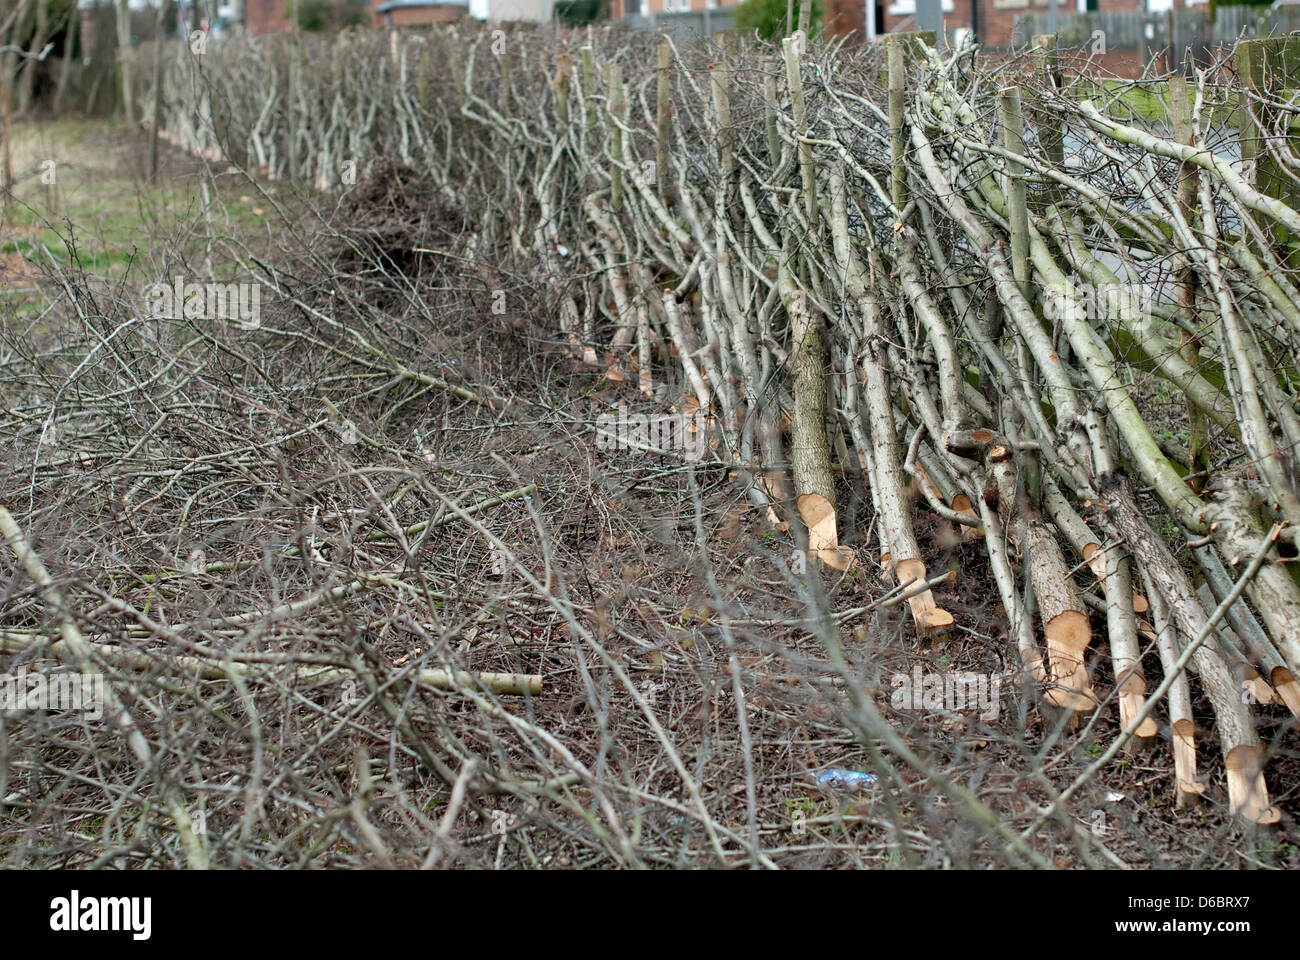 image showing recently cut hawthorn hedge with hedge layering Stock Photo